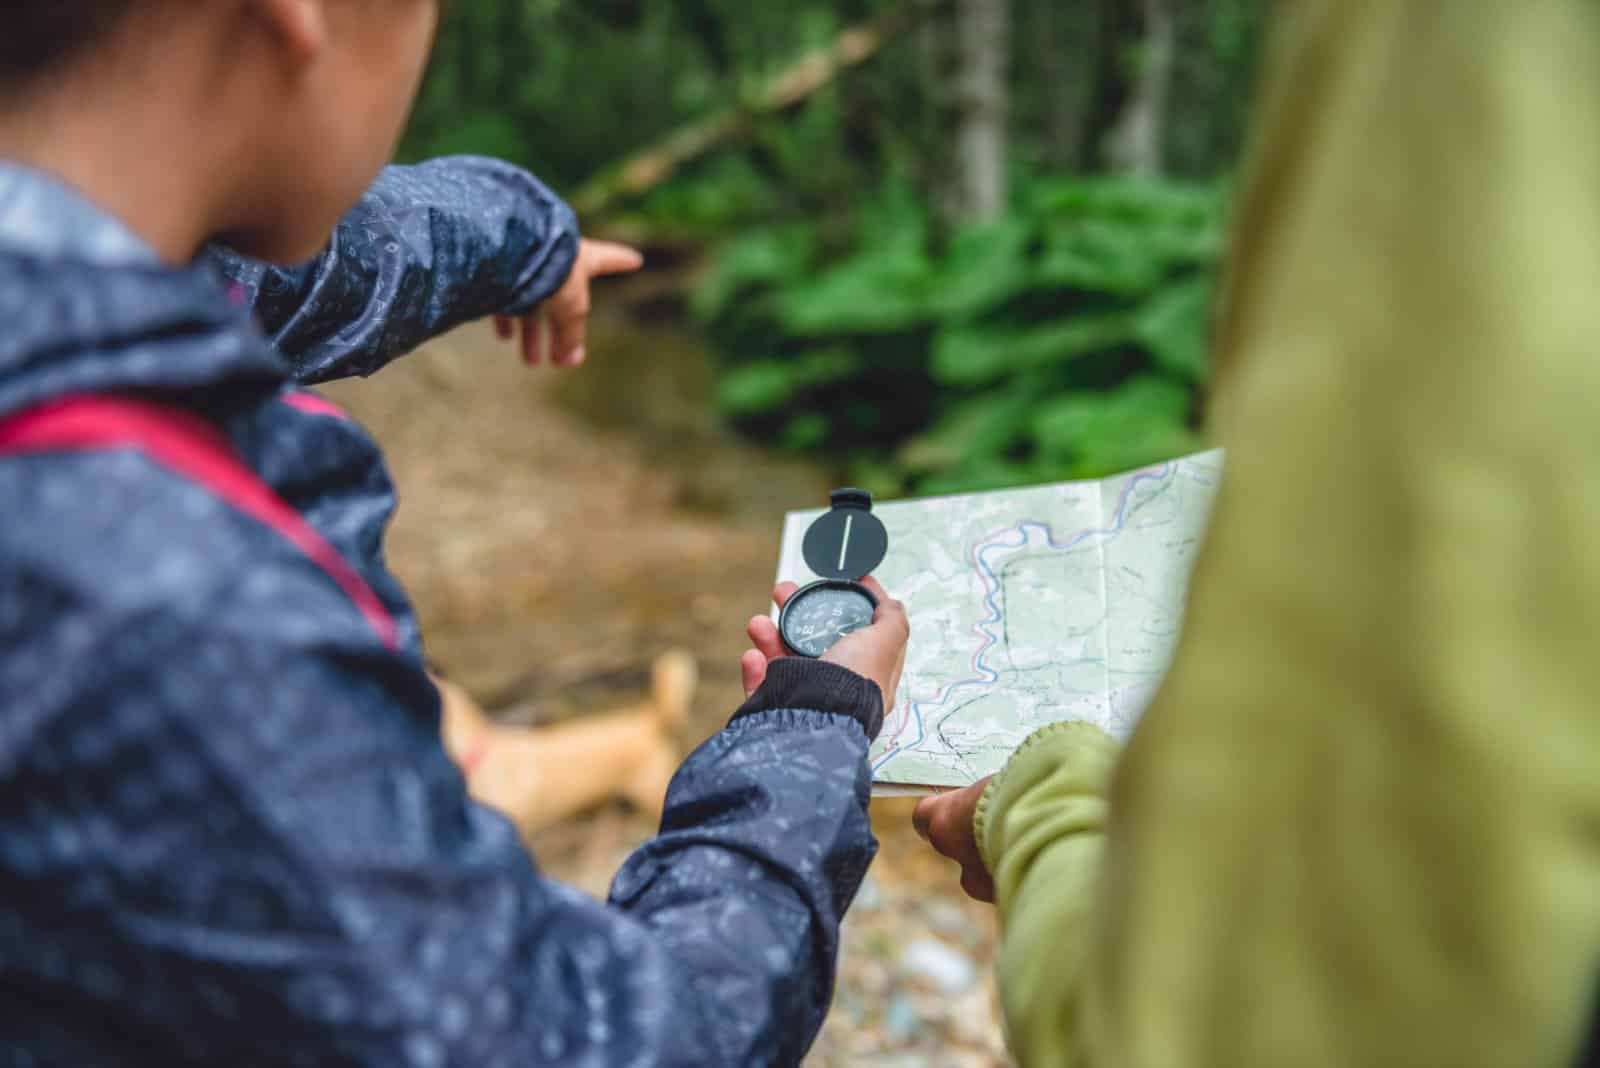 <p><span>In an age where digital navigation is ubiquitous, the traditional skills of map reading and compass navigation hold significant value in the outdoors. These fundamental tools can be indispensable in areas without cellular service or when technology fails.</span></p> <p><span>Before your trip, invest time learning how to read topographical maps and navigate using a compass. These skills enhance your safety and enrich your outdoor experience, giving you a deeper understanding of the landscape and a greater sense of self-reliance. Practice in familiar territory before relying on these skills in remote areas.</span></p> <p><span>Navigating the old-fashioned way is not only a helpful backup; it’s a way to connect more intimately with the land, allowing you to chart your course with confidence and self-sufficiency.</span></p> <p><b>Insider’s Tip: </b><span>Always carry a physical map and compass as backups.</span></p>